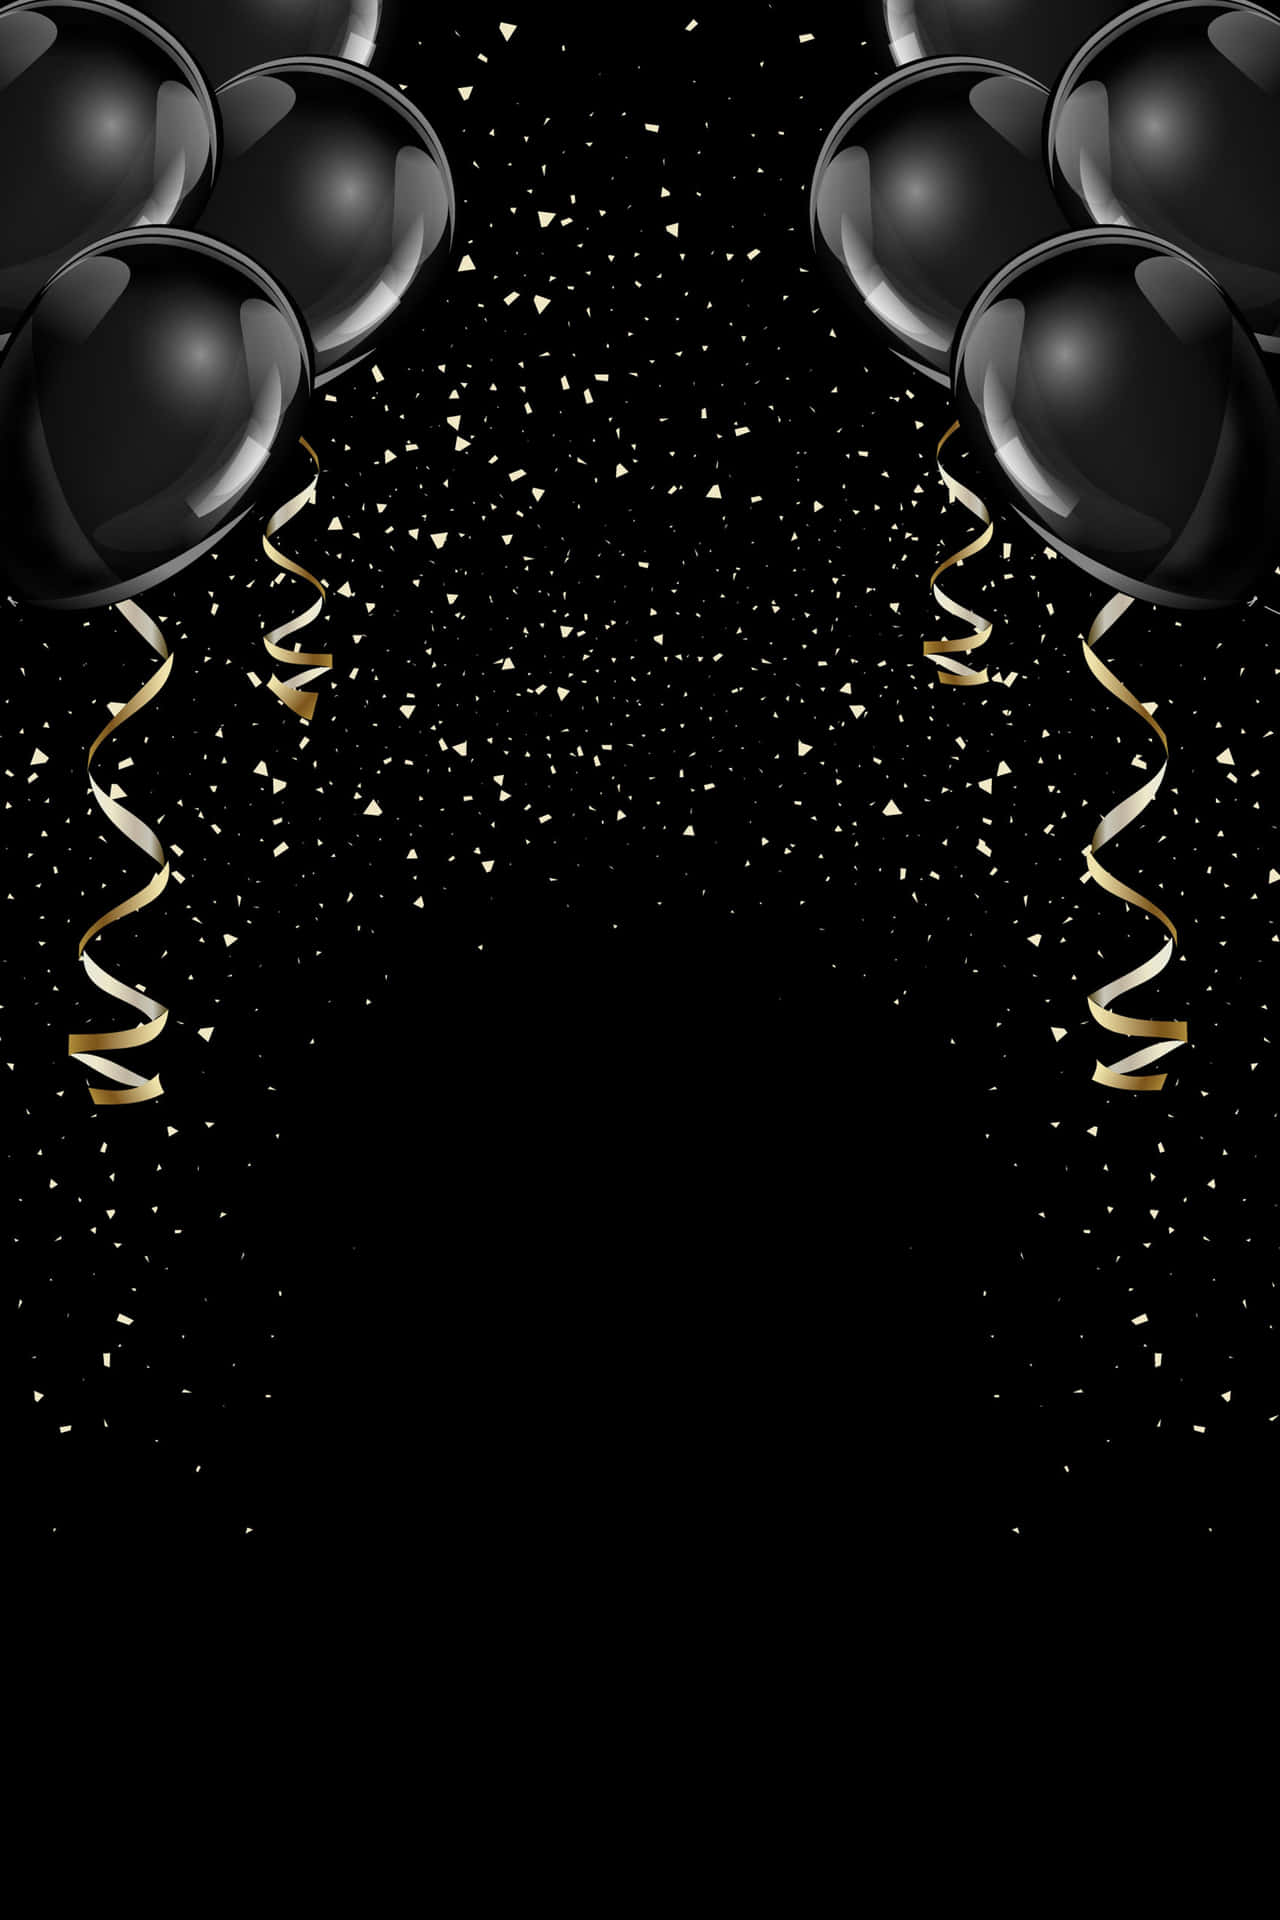 Birthday Balloons Black Aesthetic With Confetti Picture